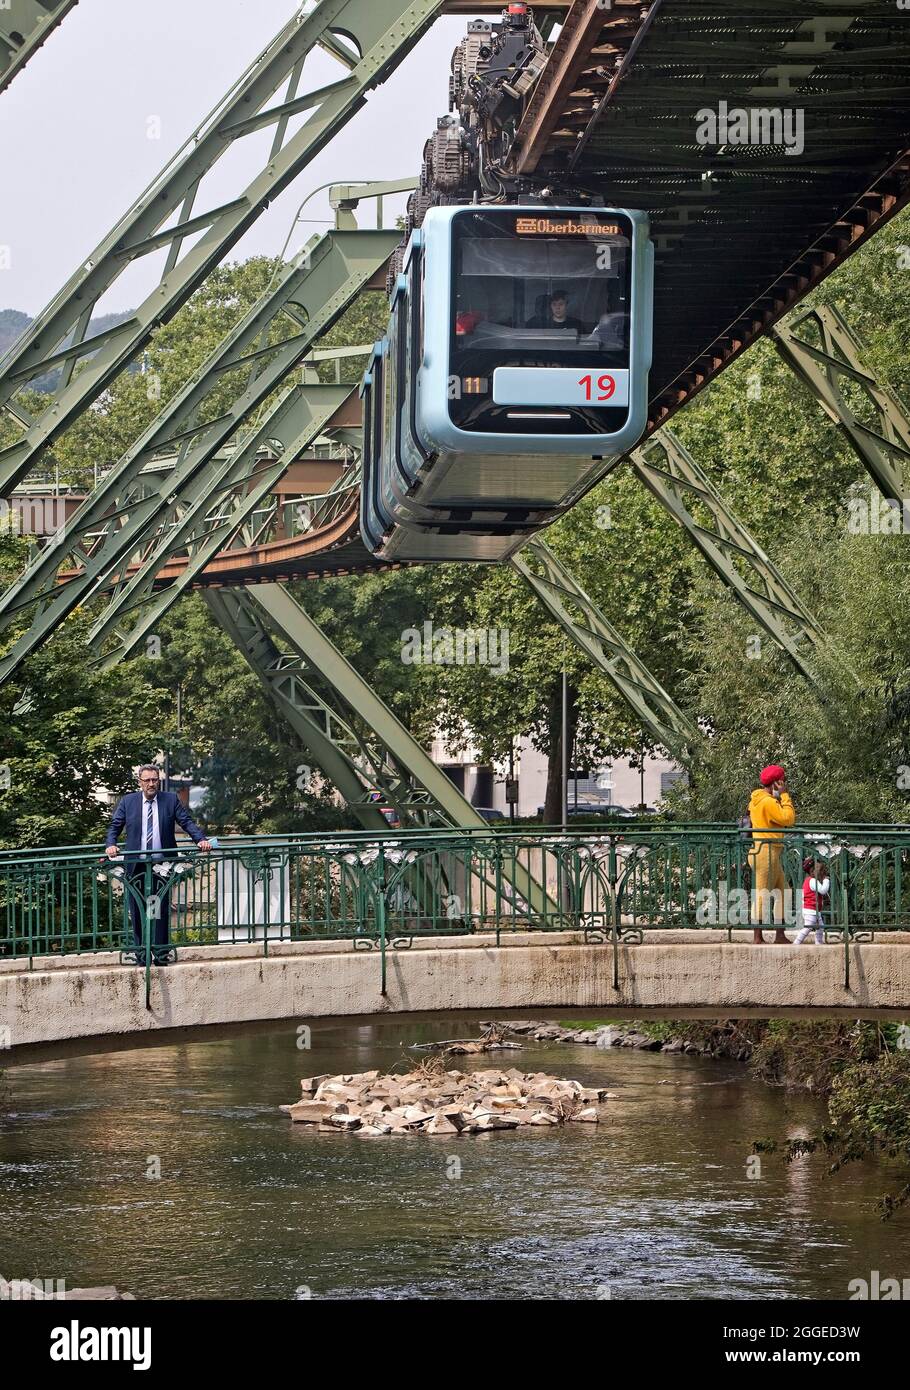 Suspension railway over the river Wupper, Elberfeld, Wuppertal, Bergisches Land, North Rhine-Westphalia, Germany Stock Photo